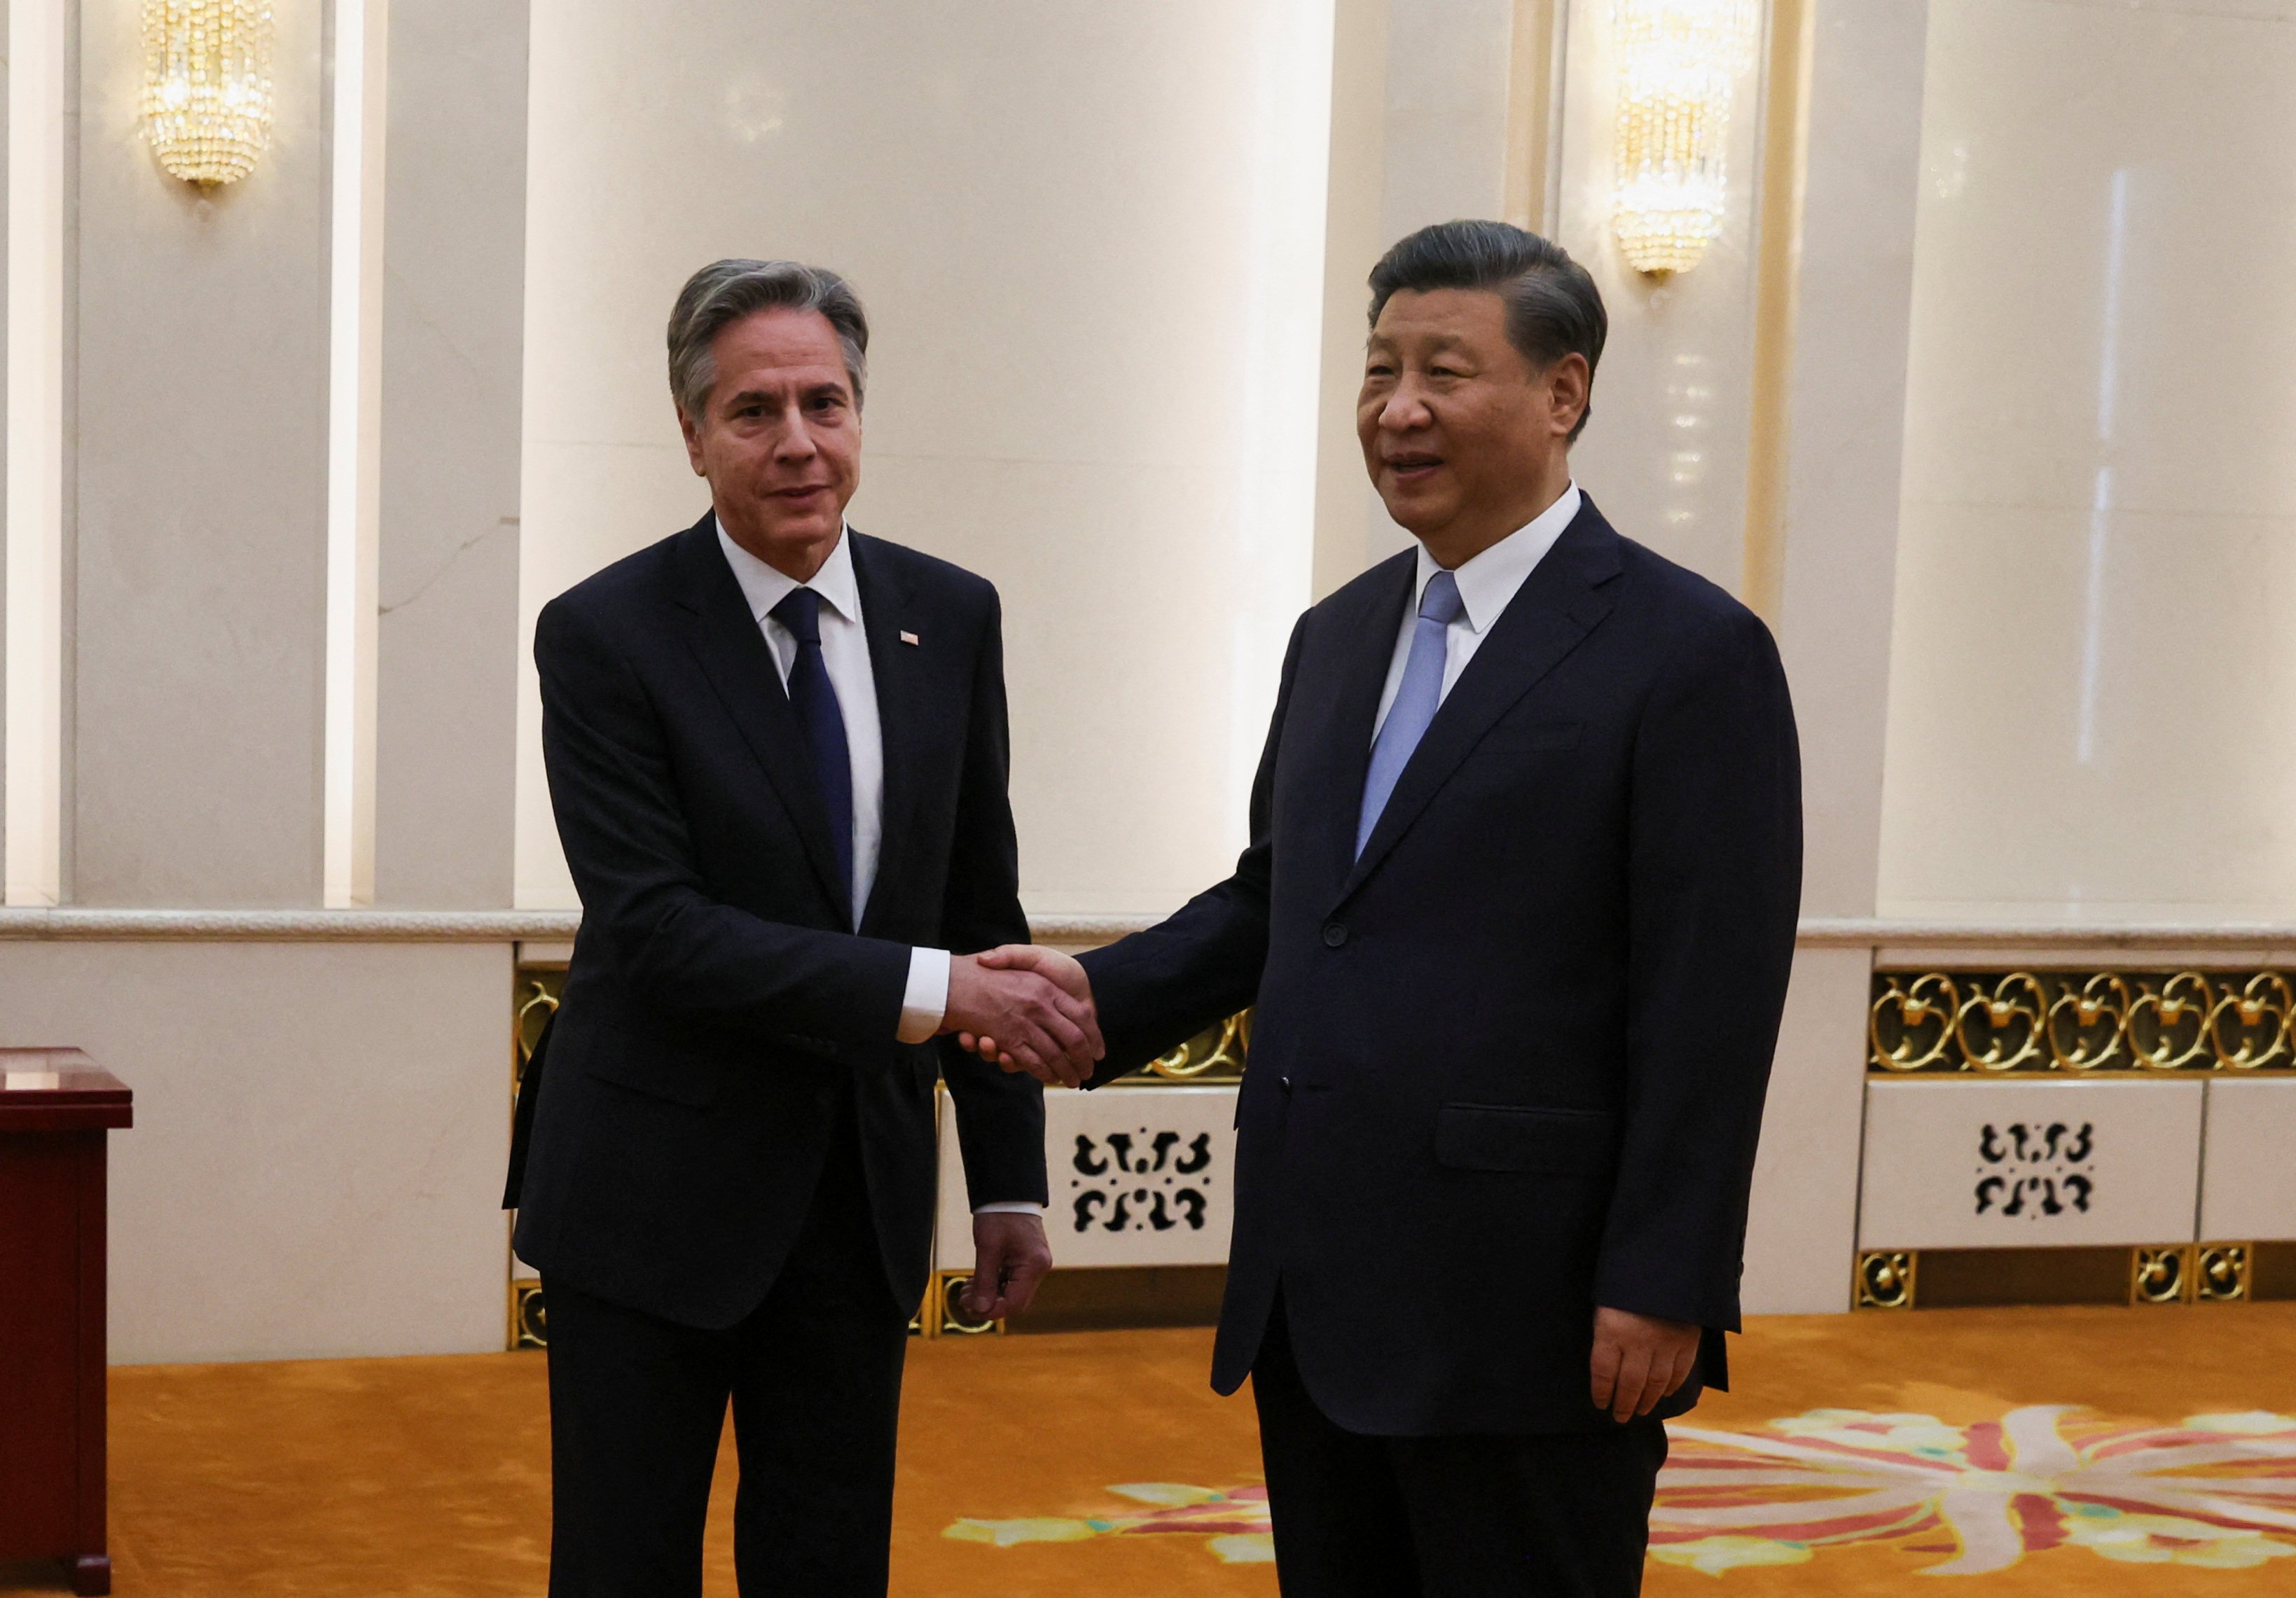 US Secretary of State Antony Blinken shakes hands with Chinese President Xi Jinping in the Great Hall of the People in Beijing. Photo: Reuters